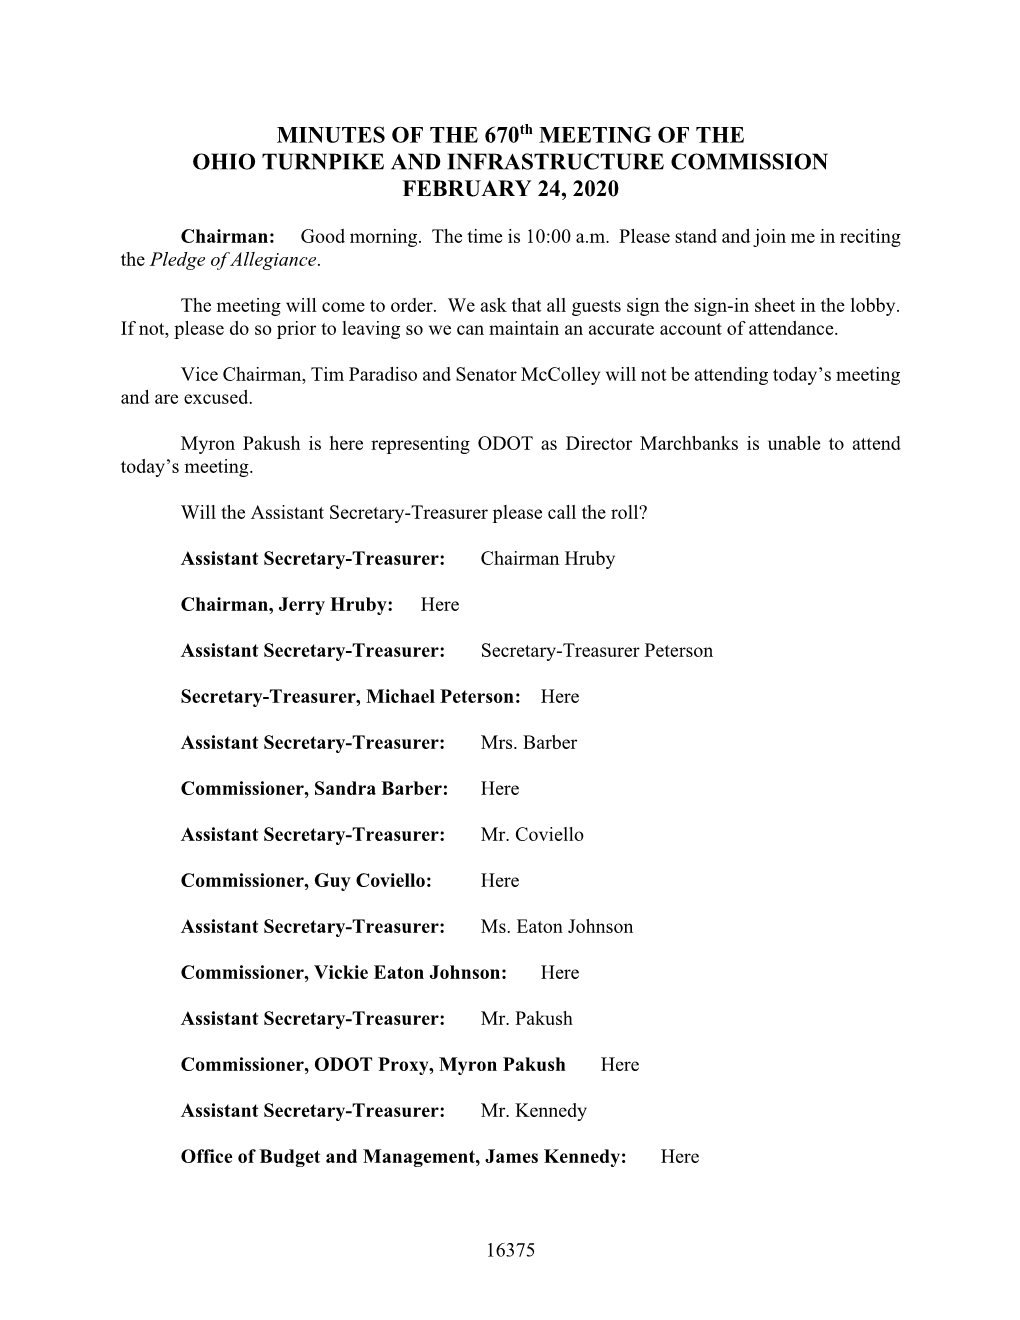 MINUTES of the 670Th MEETING of the OHIO TURNPIKE and INFRASTRUCTURE COMMISSION FEBRUARY 24, 2020